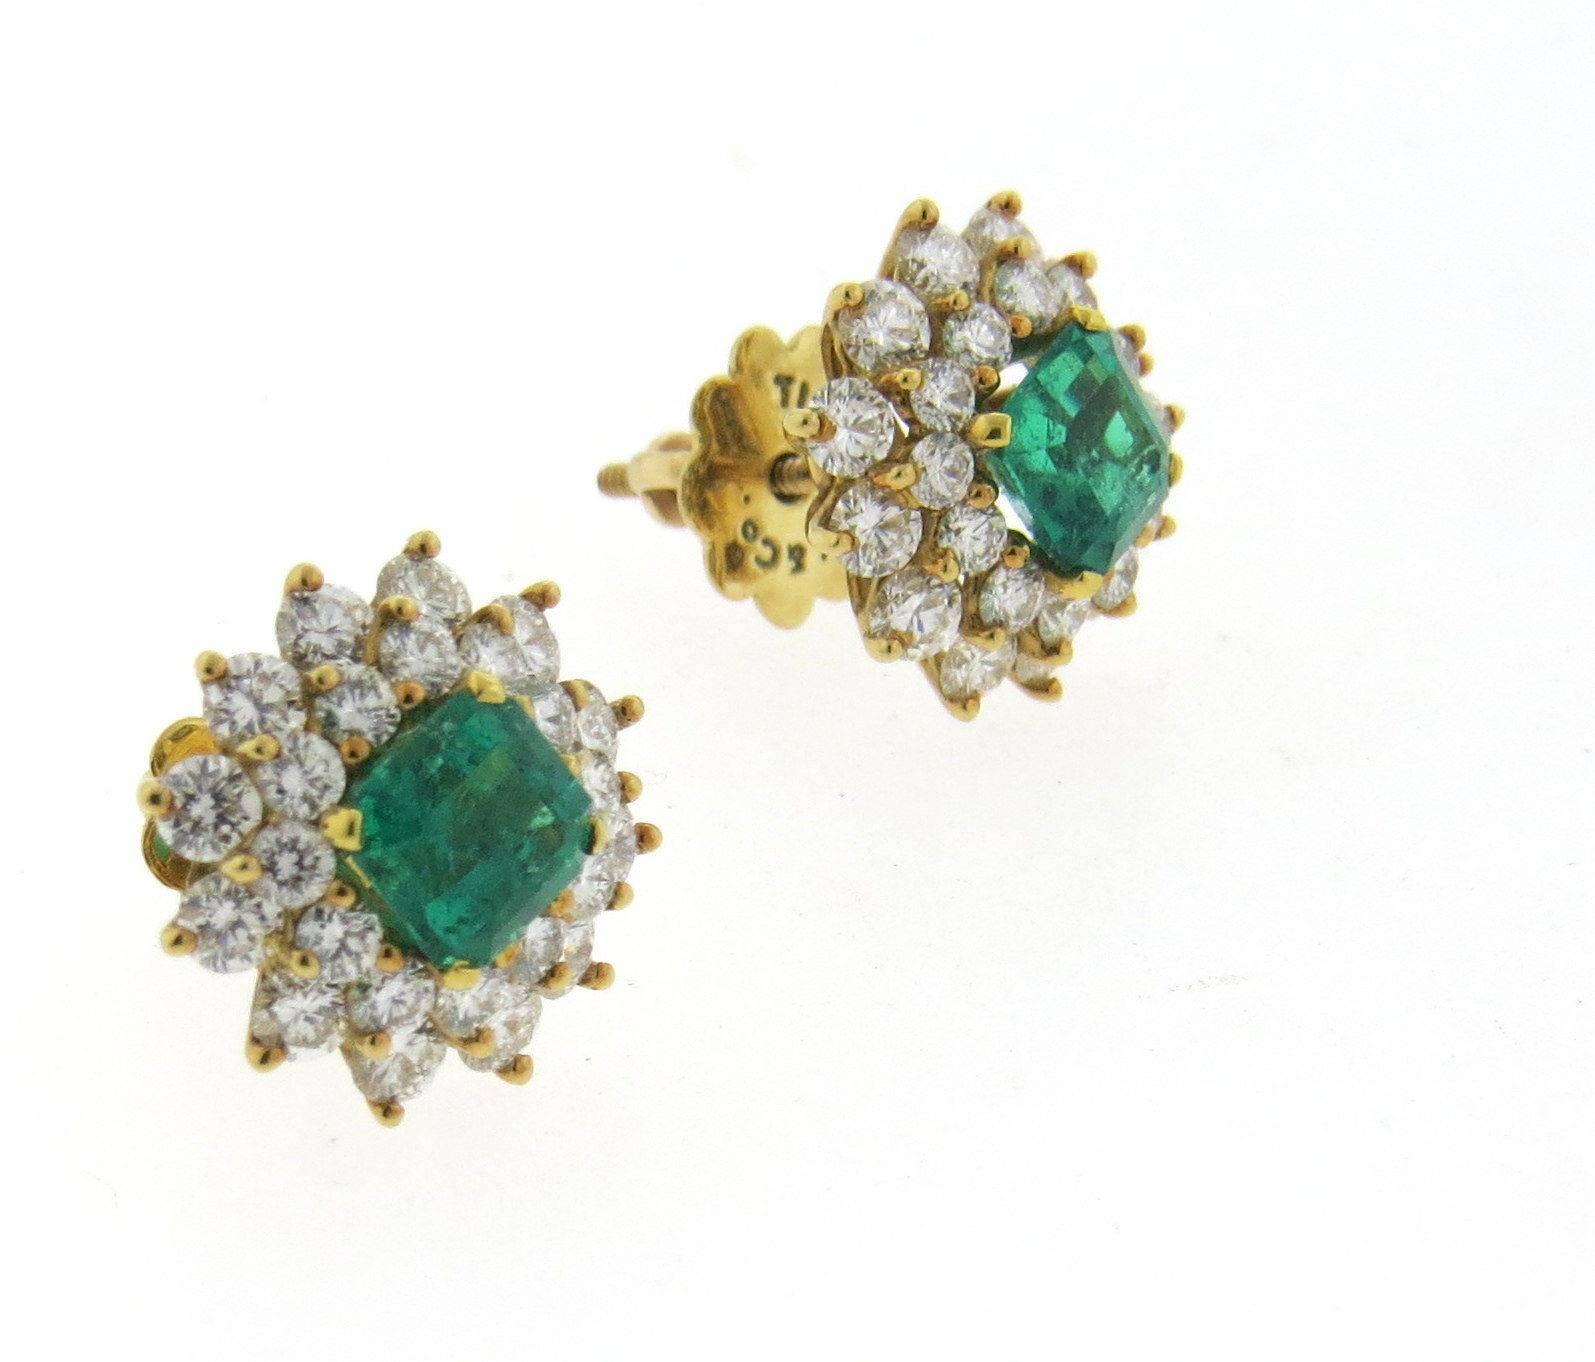 A pair of 18k yellow gold earrings set with approximately 2 carats of G/VS diamonds and emeralds measuring 5.9mm x 5.5mm.  Crafted by Tiffany & Co., the earrings measure 13mm x 12.5mm and weigh 5.6 grams. Marked: Tiffany & Co, 18k